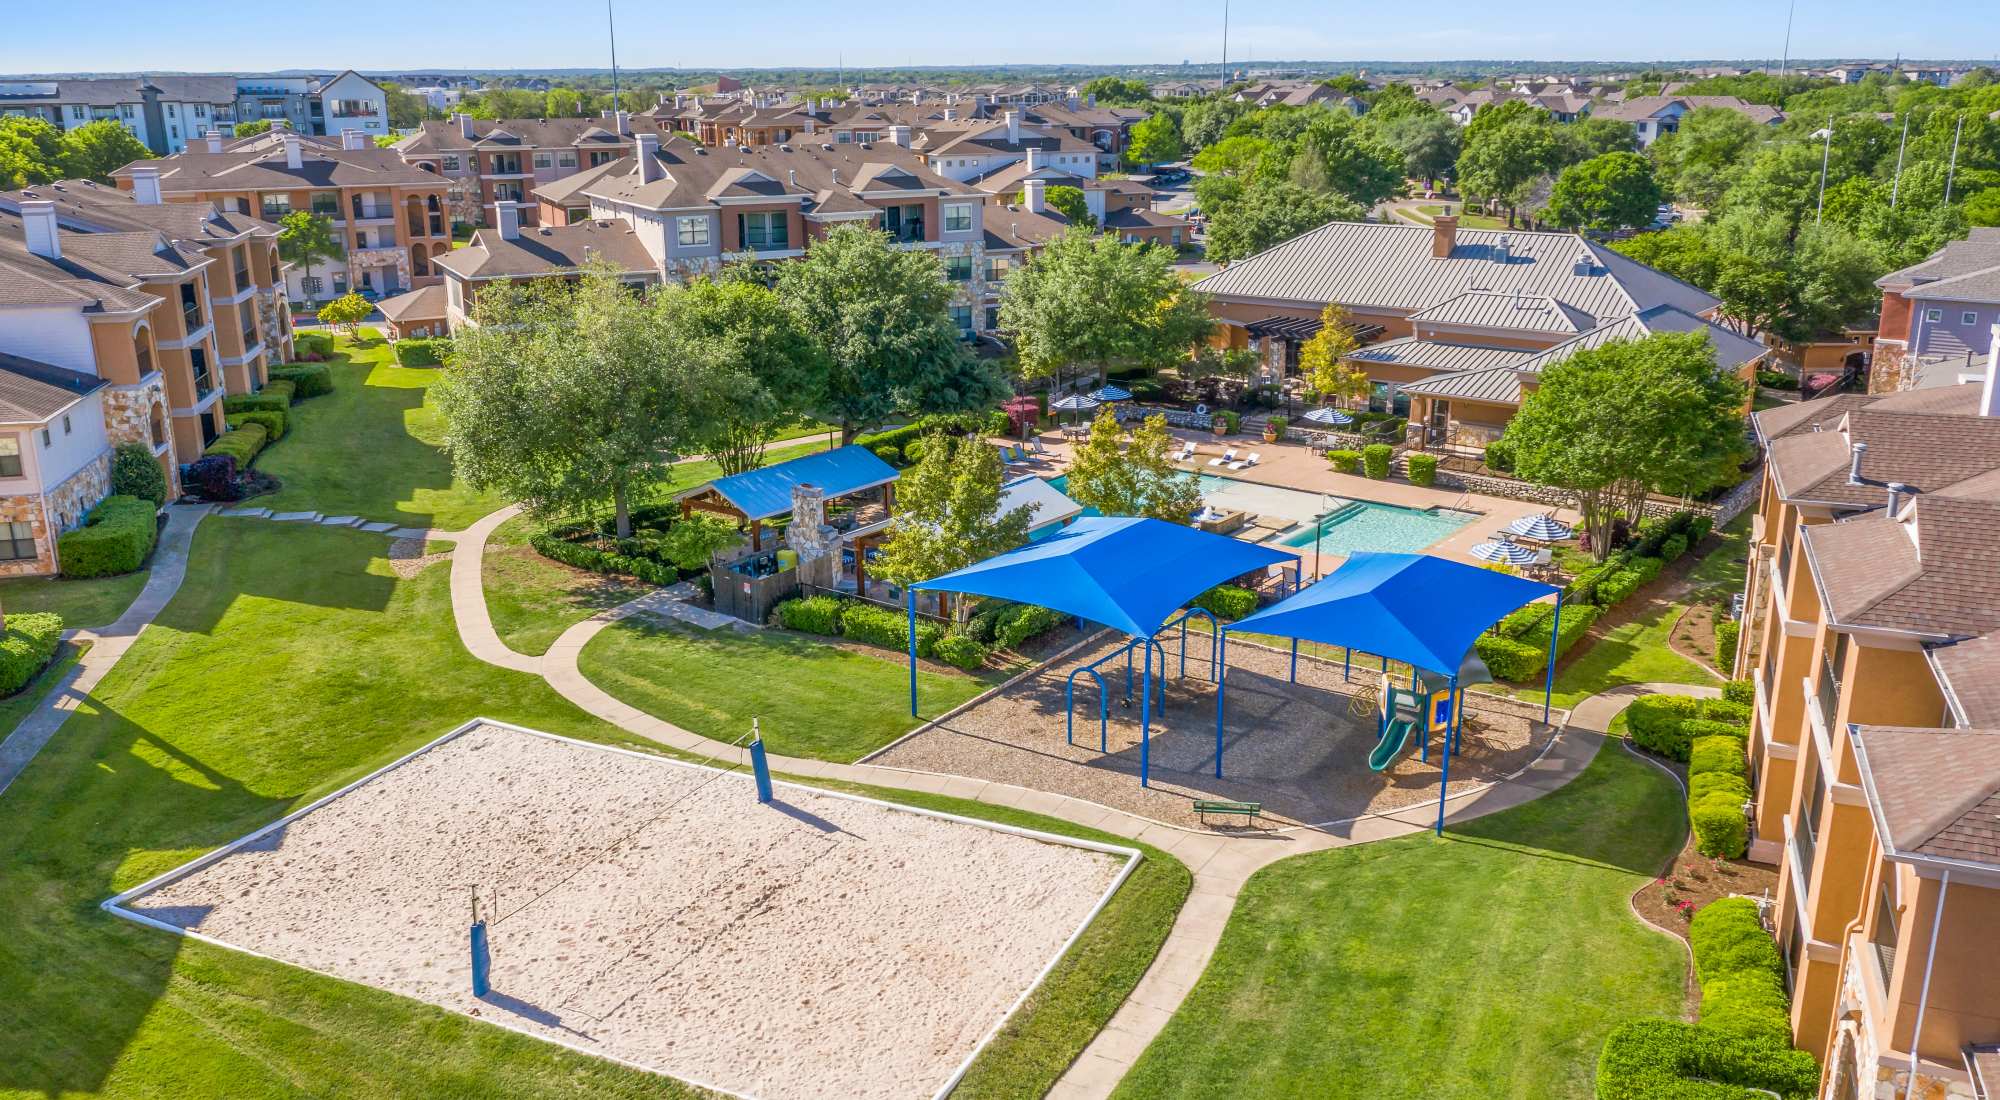 Ariel view of sand volleyball court, playground, and swimming pool at Onion Creek